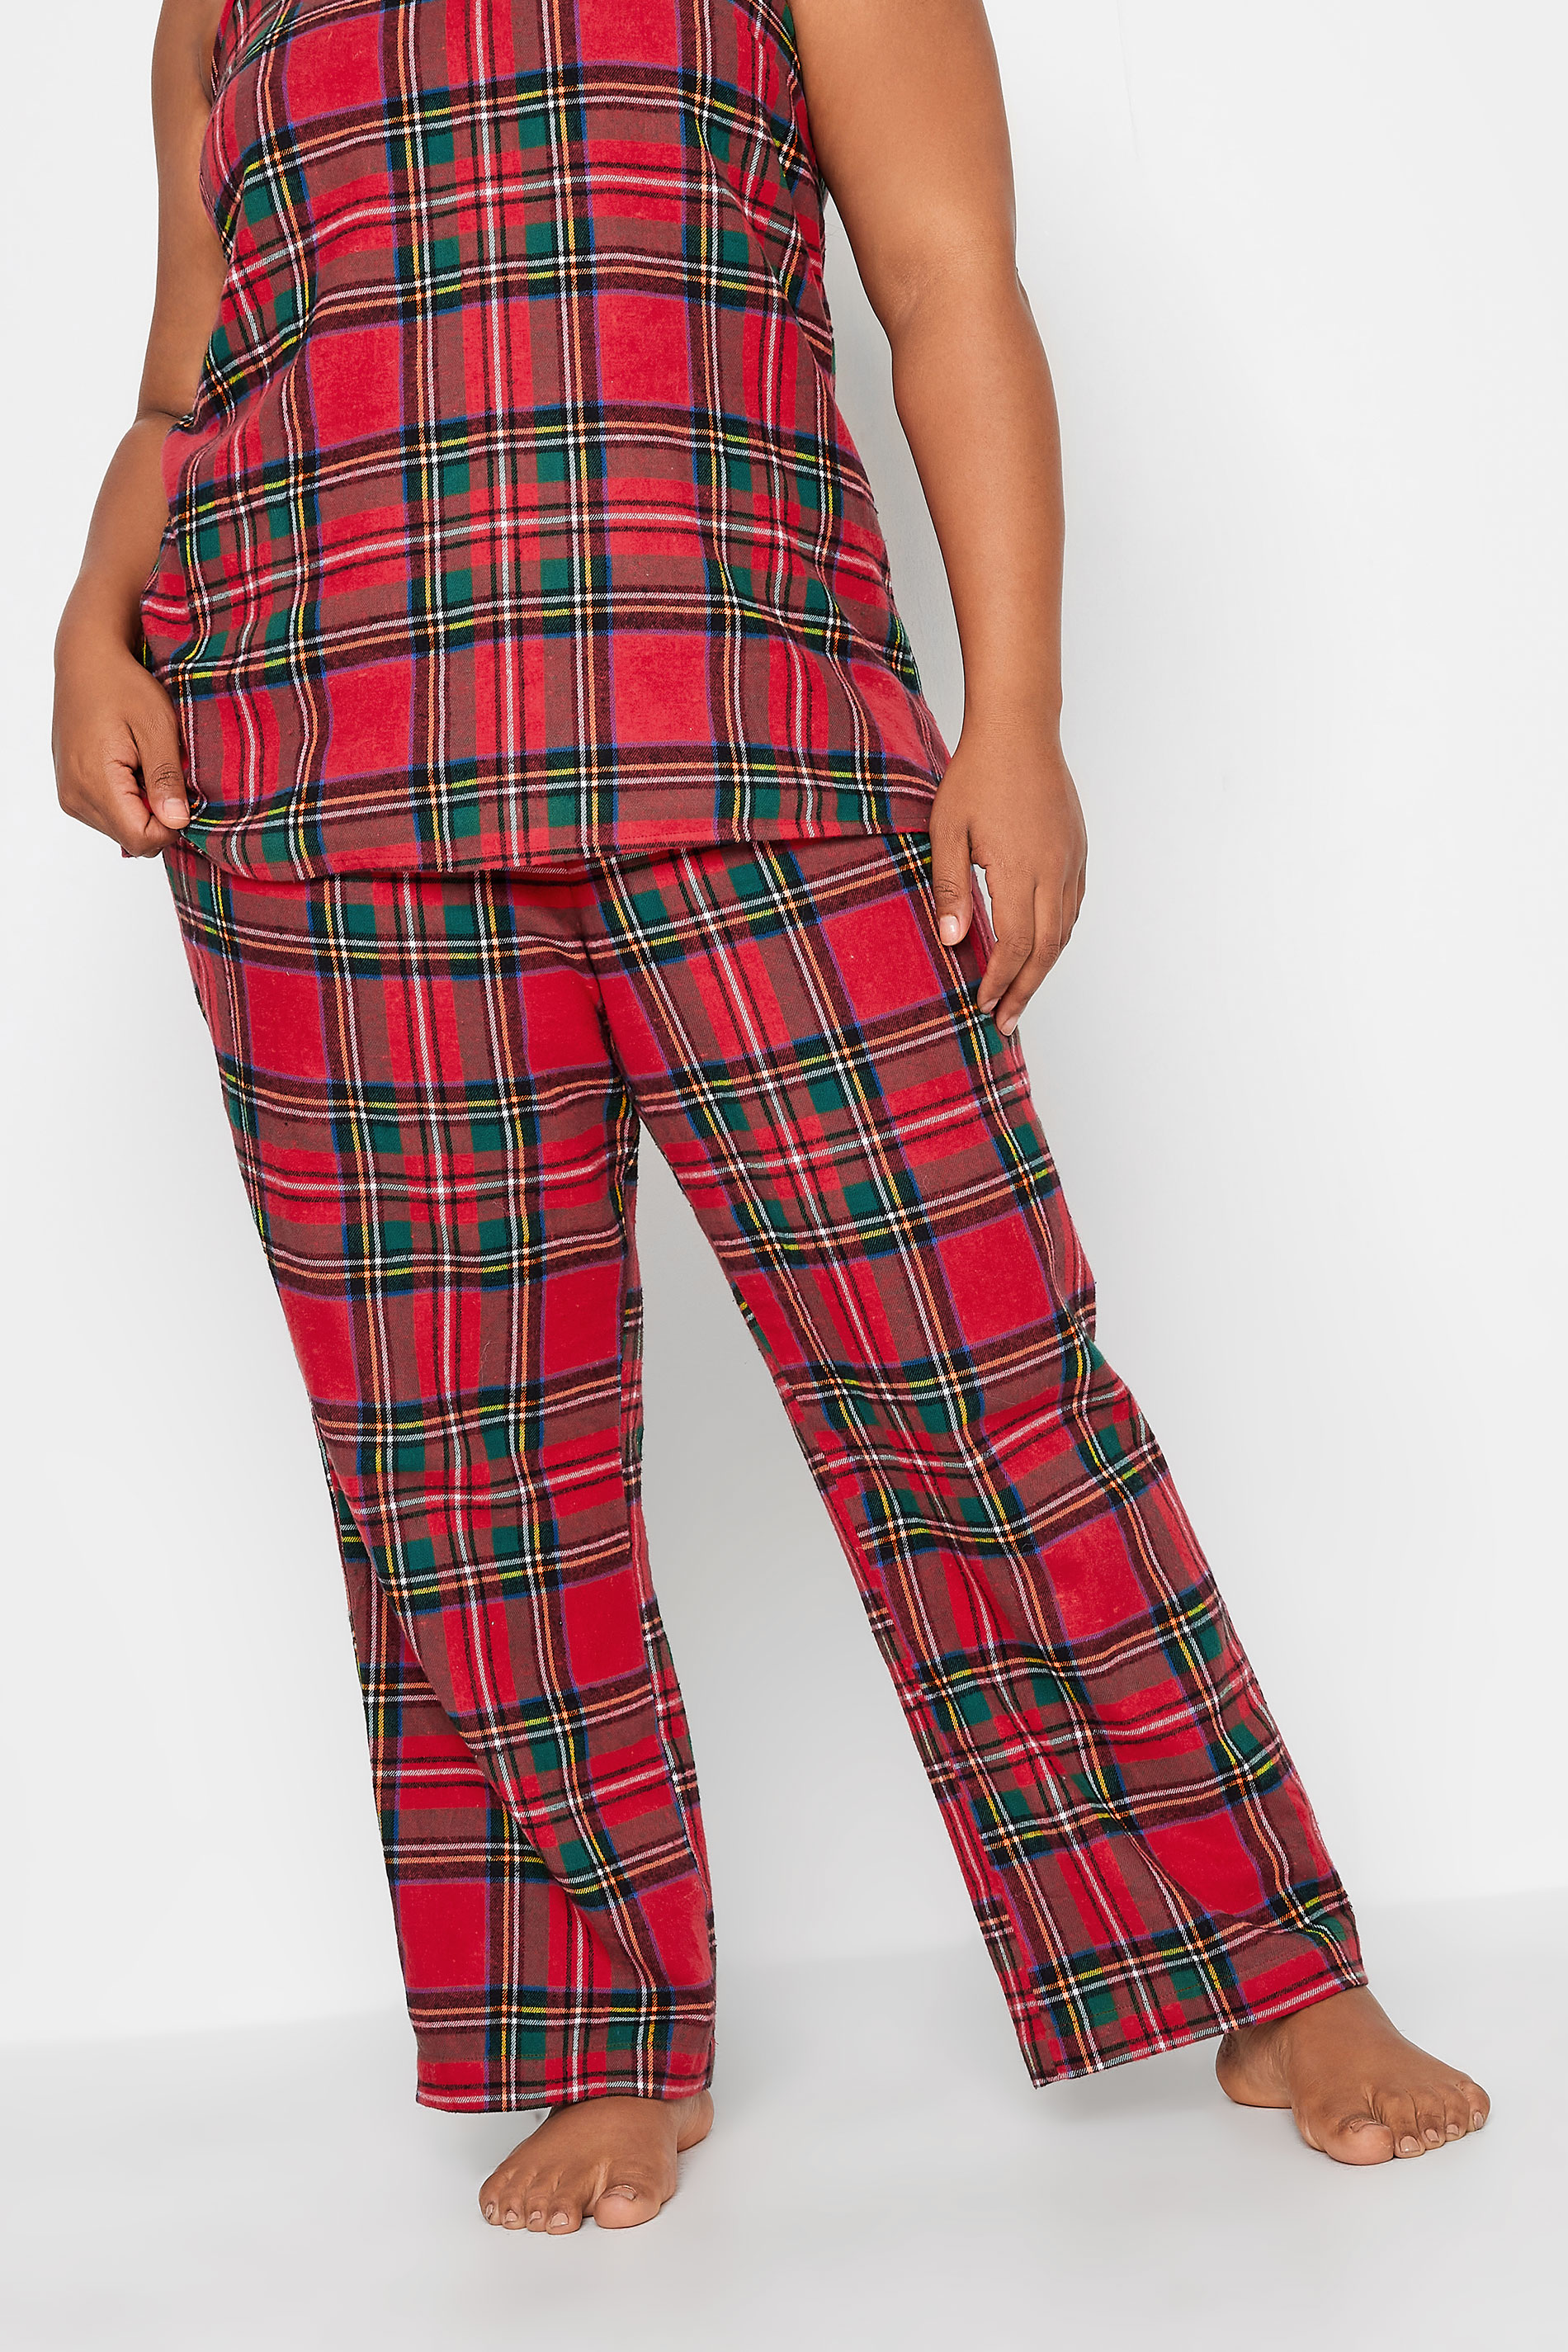 LIMITED COLLECTION Plus Size Red Tartan Check Cami Pyjama Top